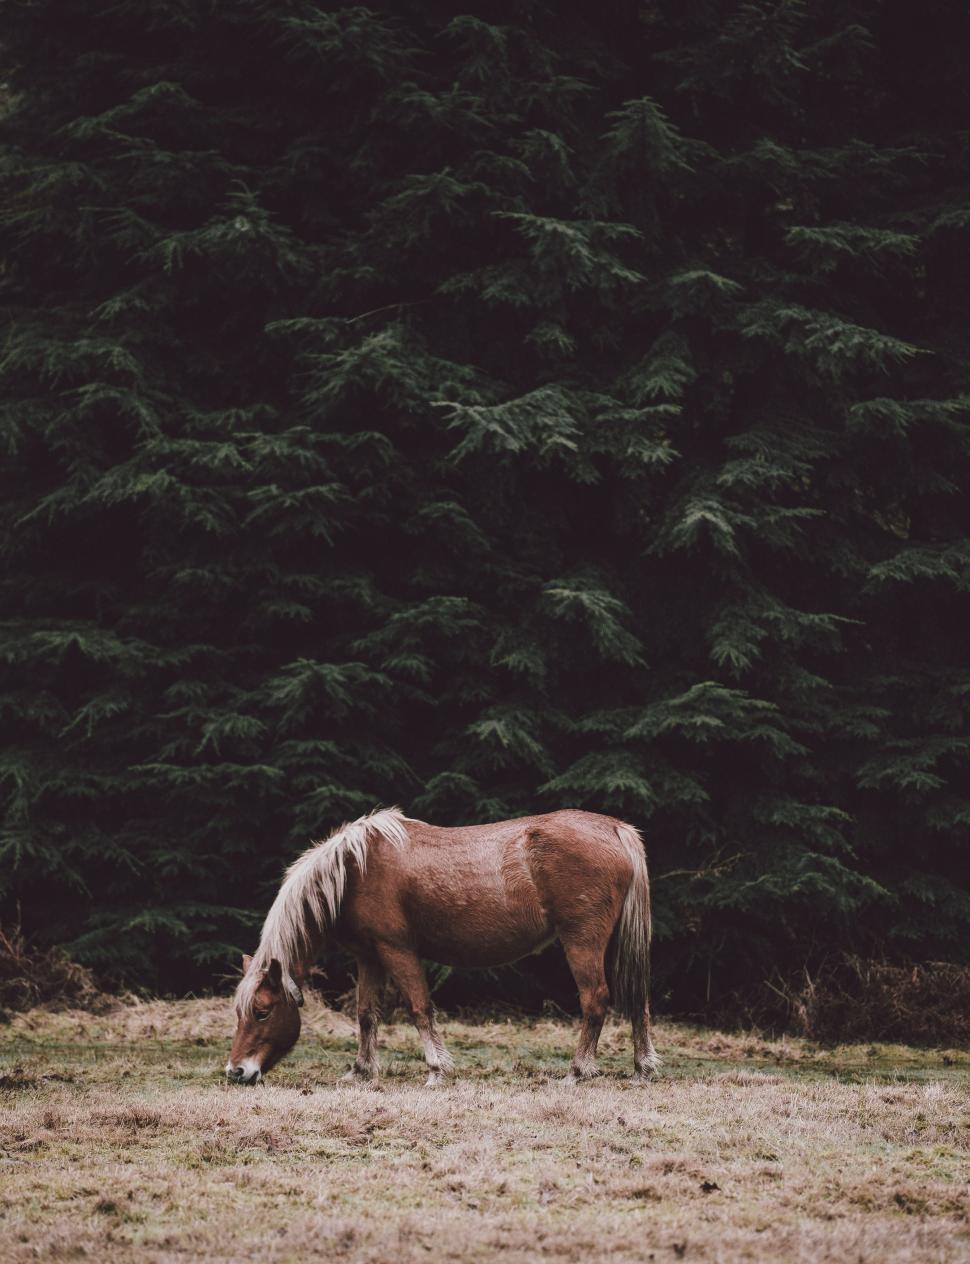 Free Image of Horse Grazing in Field With Trees in Background 